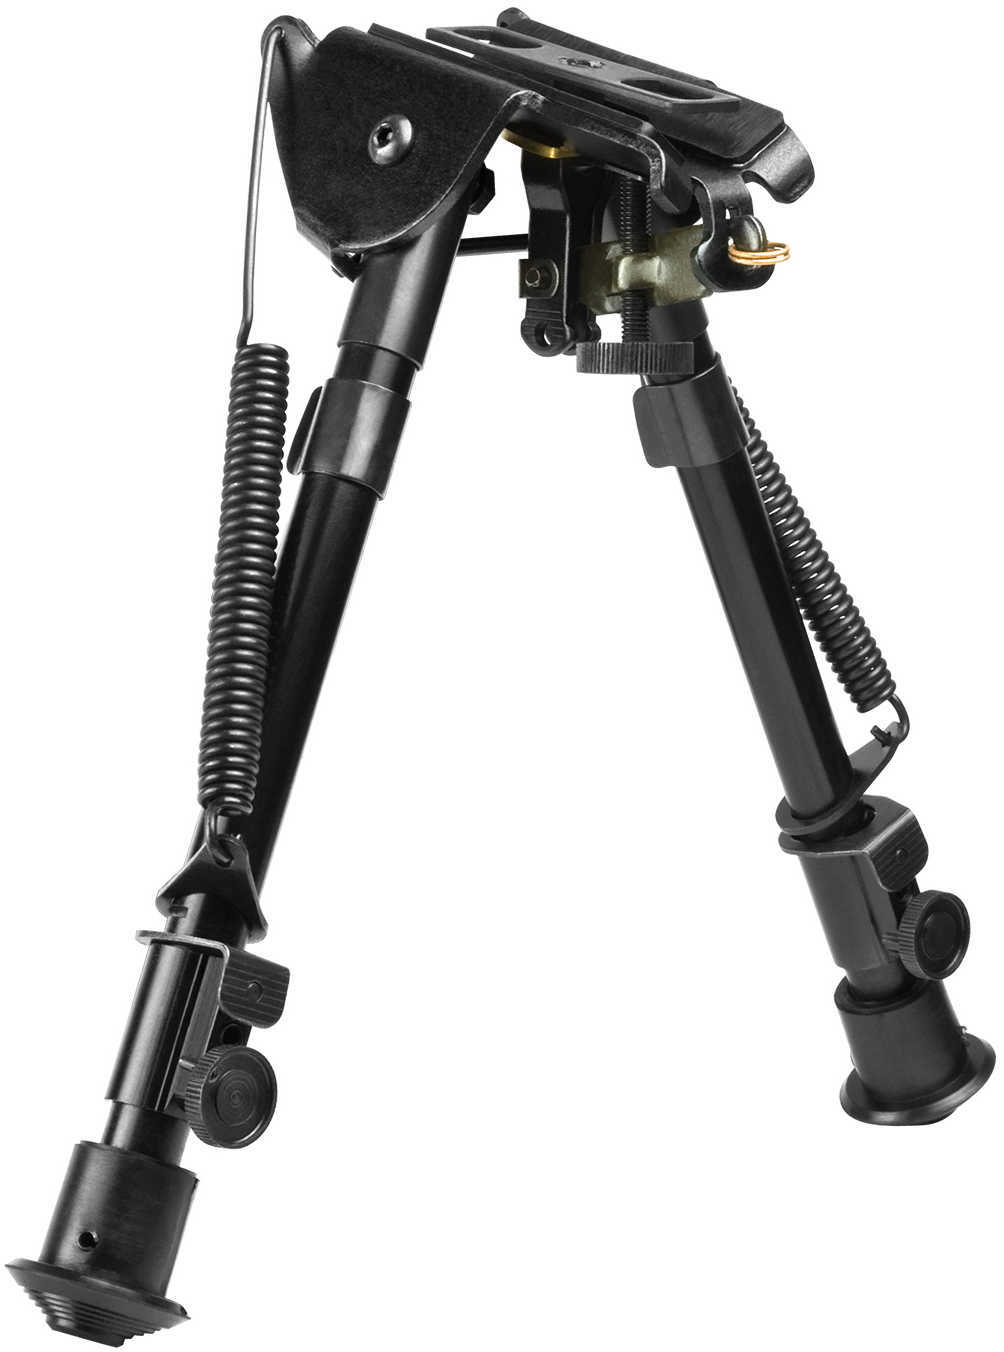 NcStar Bipod Precision Grade, Full Size, 3 Adapters ABPGF